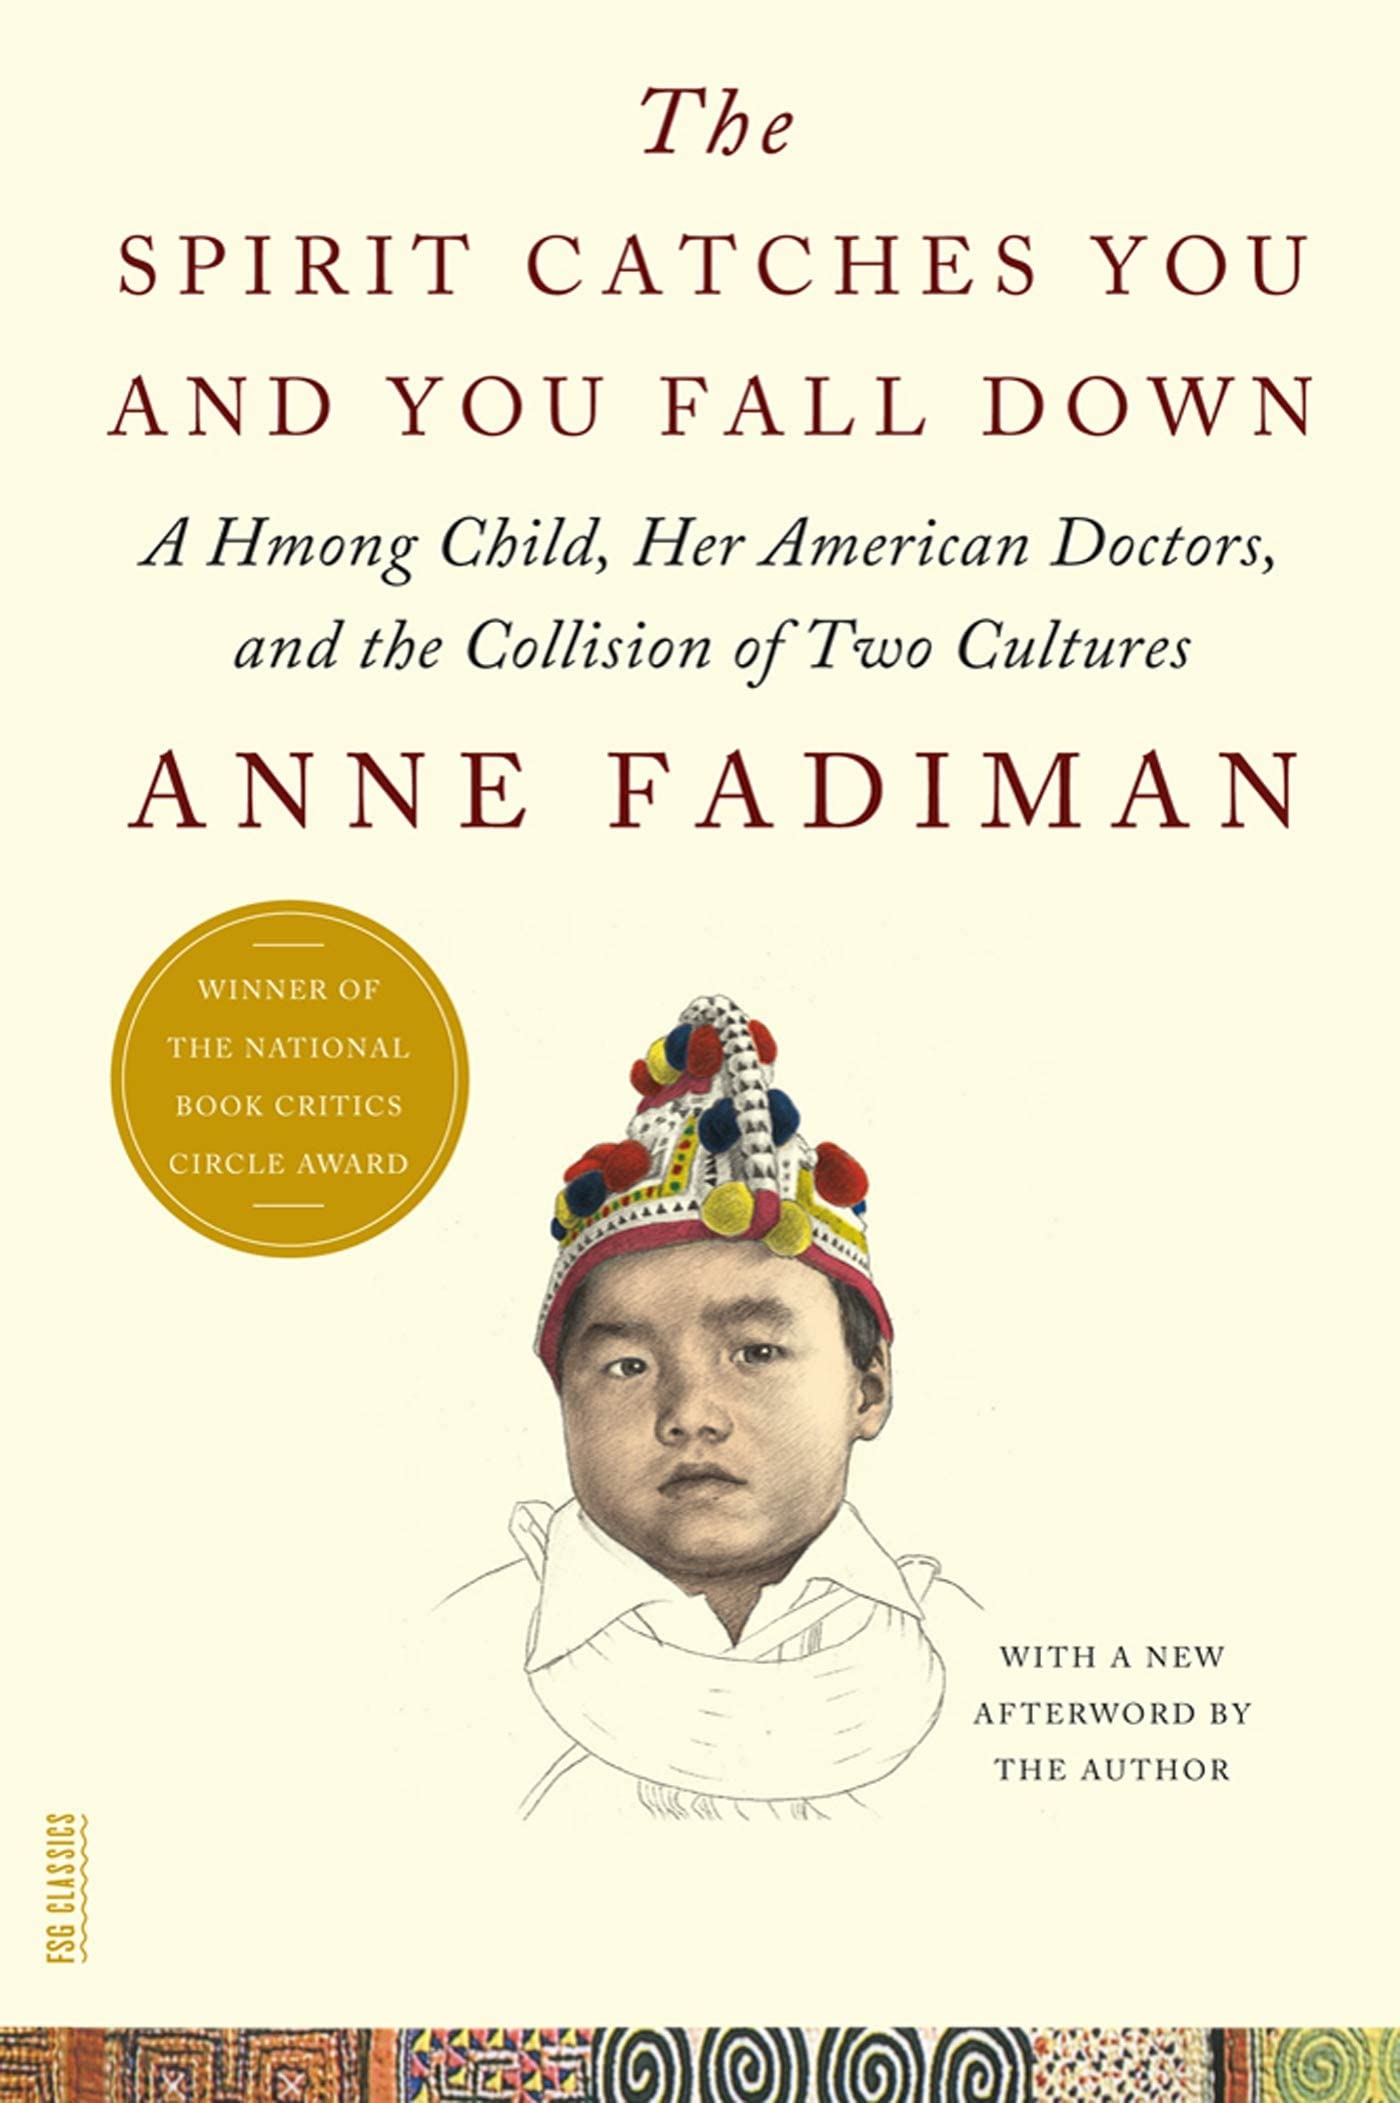 71wl3XNw8SL - The Spirit Catches You and You Fall Down: A Hmong Child, Her American Doctors, and the Collision of Two Cultures (FSG Classics) by Anne Fadiman (2012-04-24)